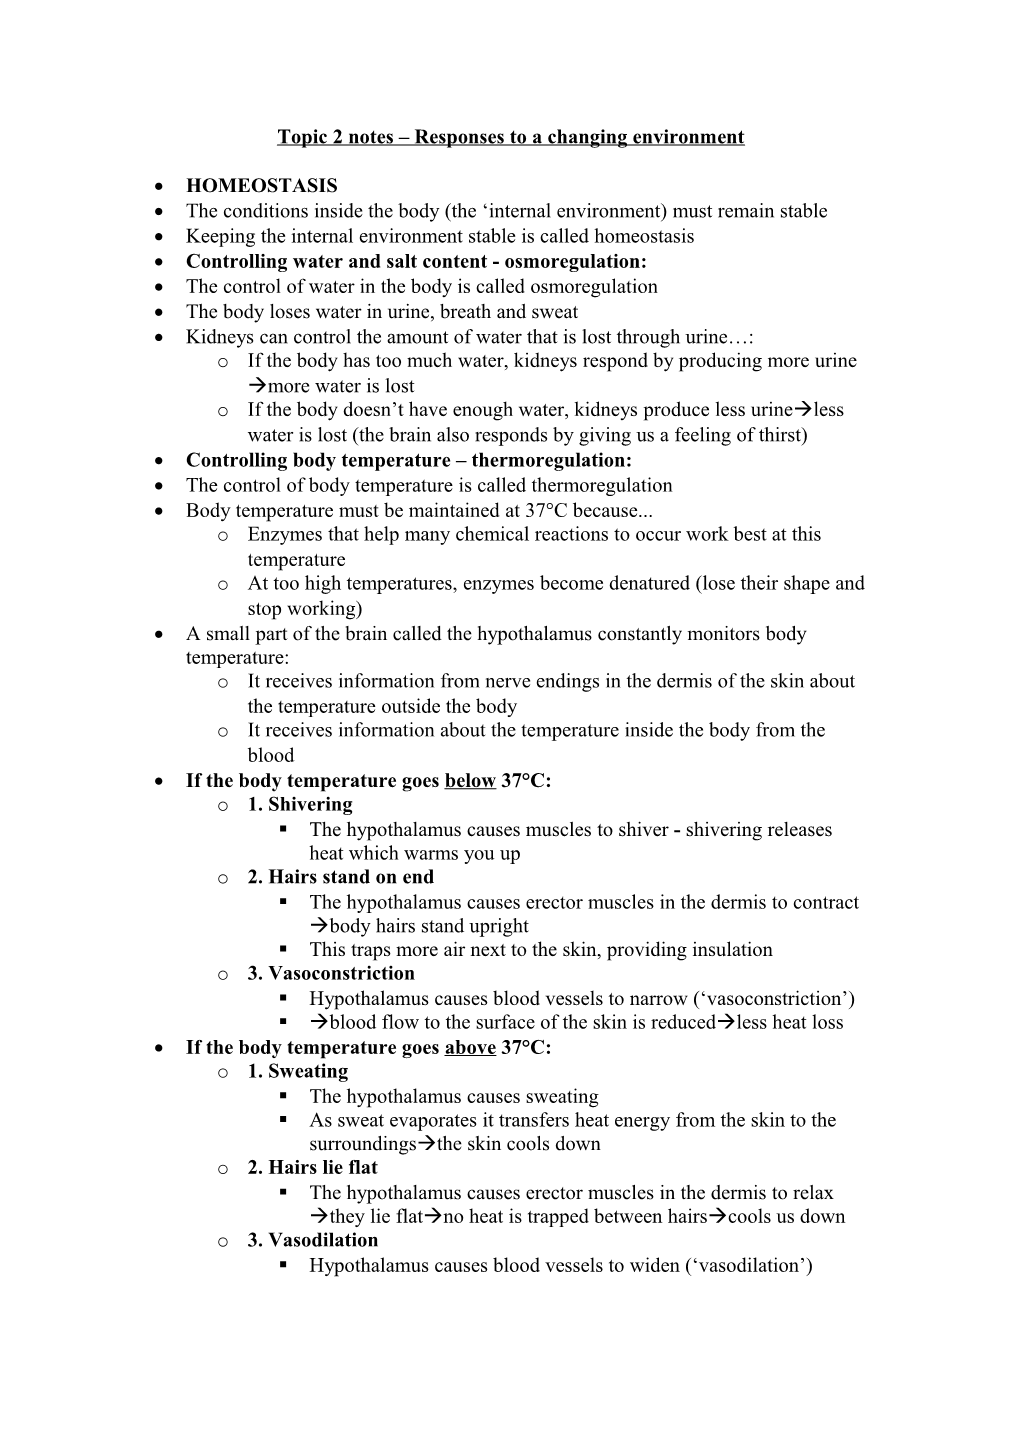 Topic 2 Notes Responses to a Changing Environment